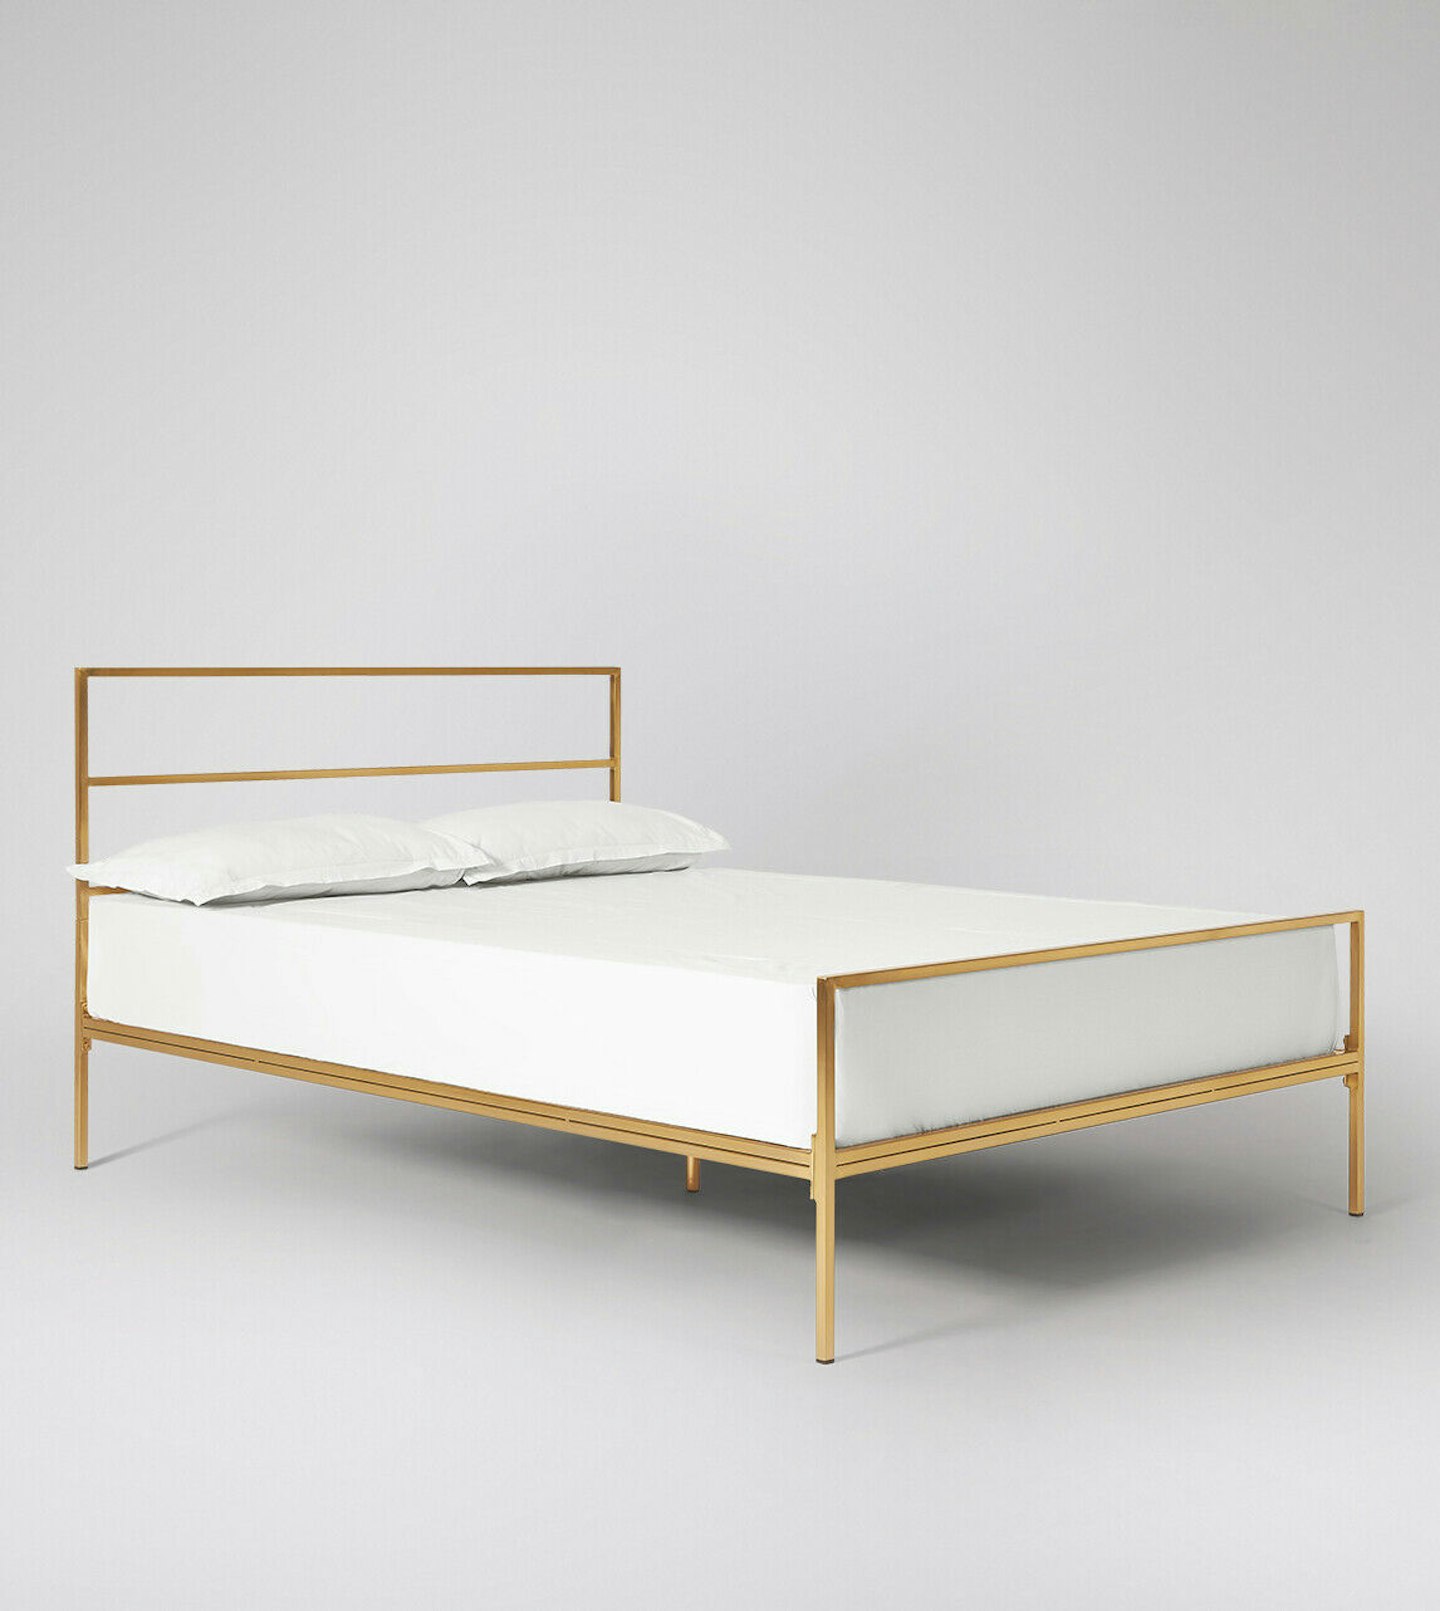 Swoon, Antique Brass Bed Frame, £299.99